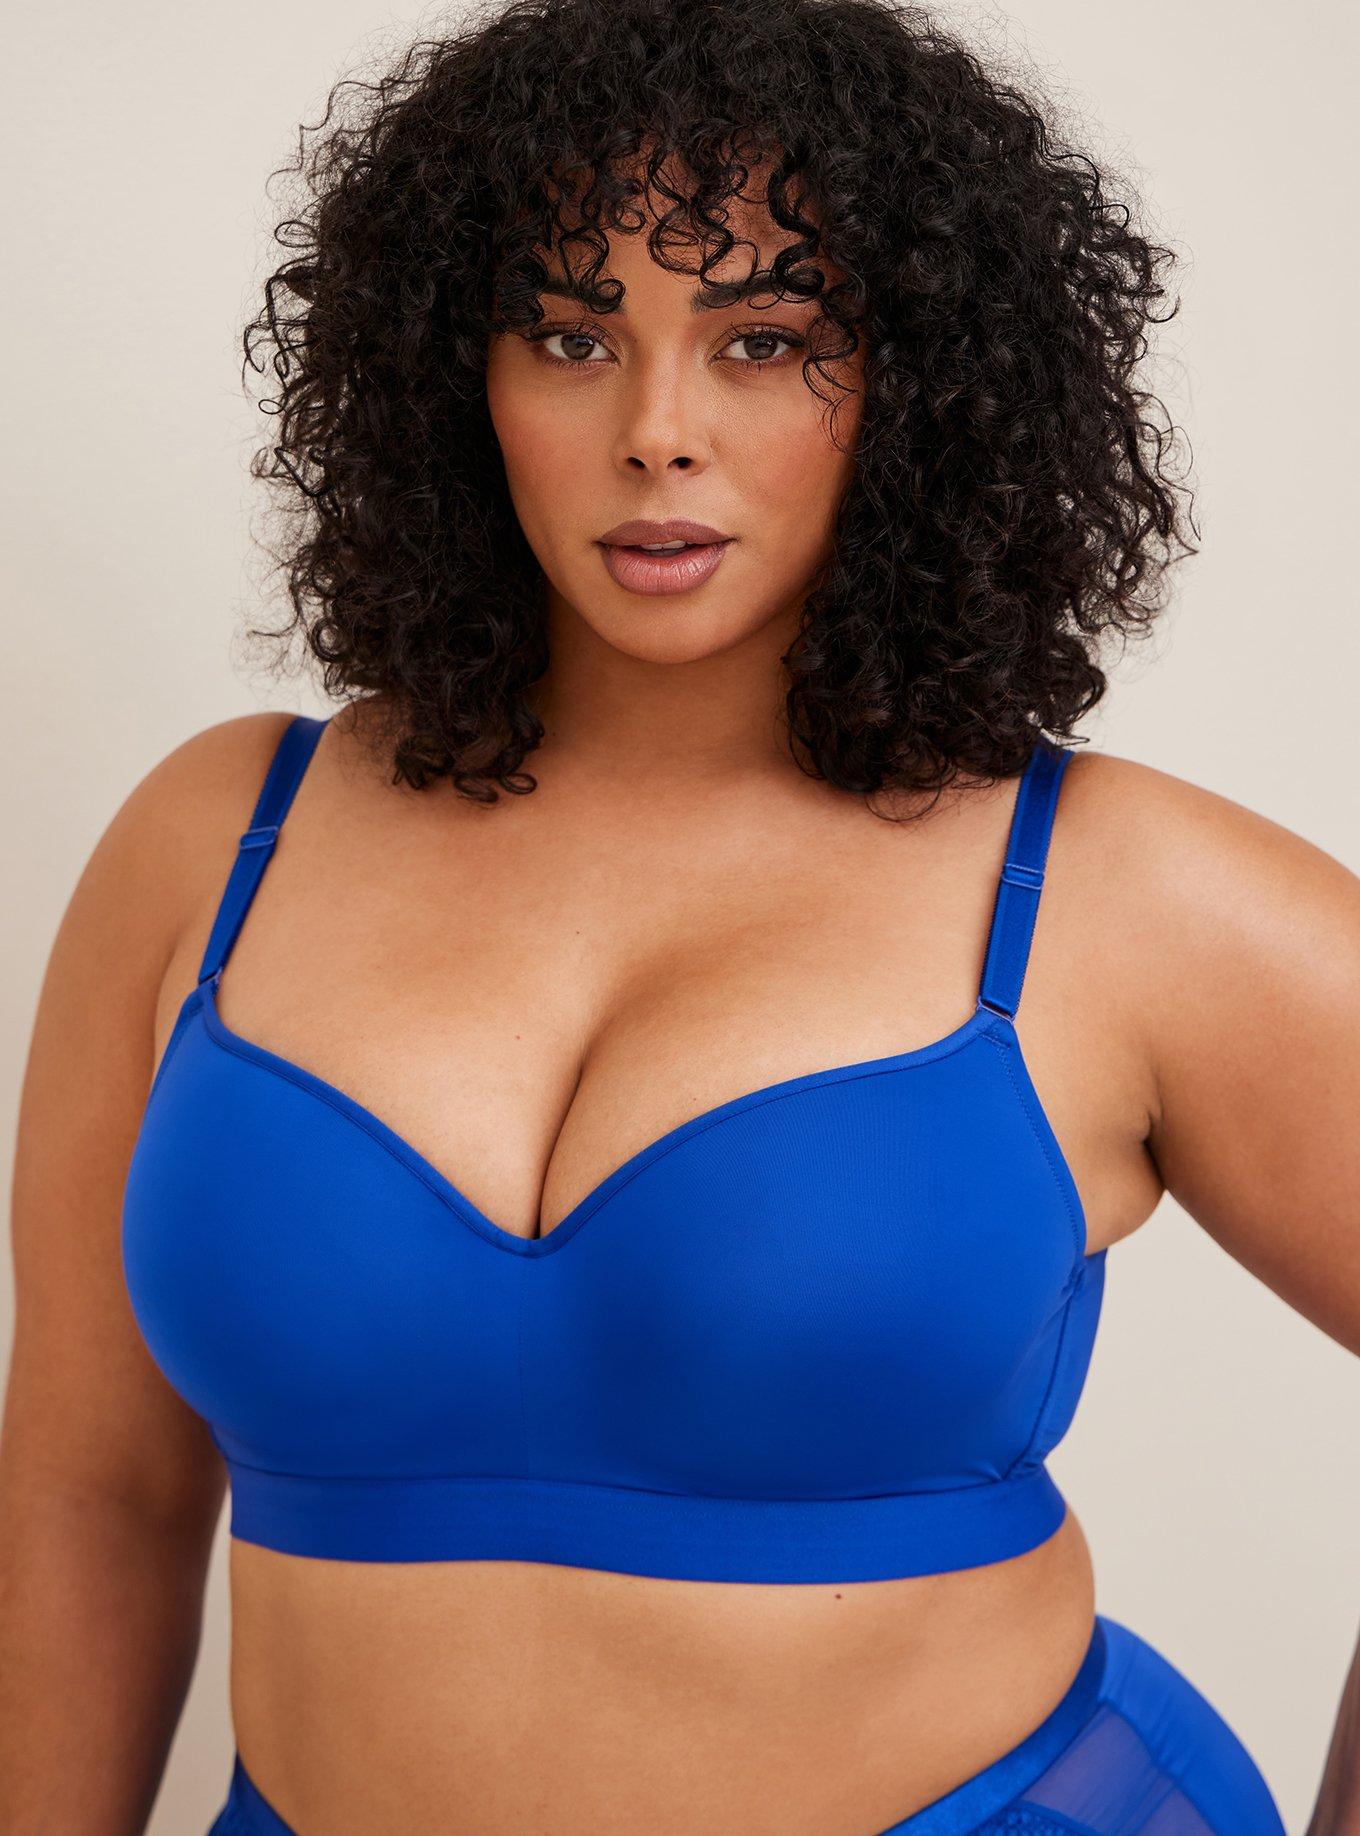 Torrid Curve Womens Bra 48DDD Lightly Lined Full Coverage Balconette Lace  NWT - AbuMaizar Dental Roots Clinic